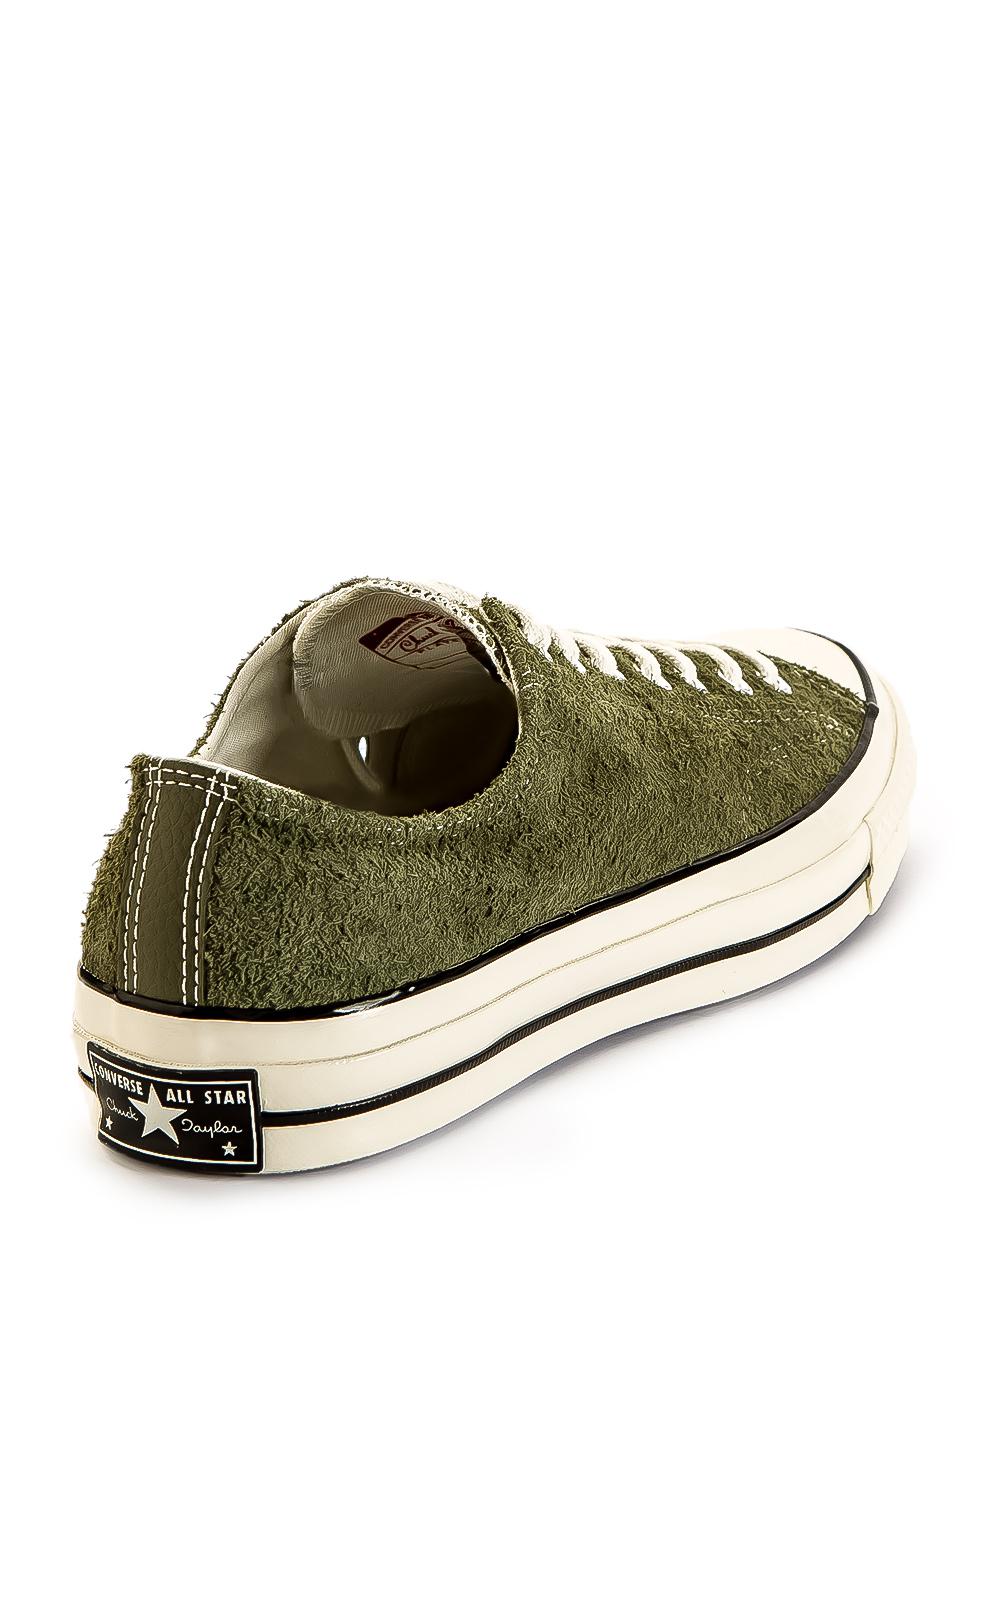 Converse Chuck Taylor All Star 70 Ox Suede Olive in Green for Men - Lyst